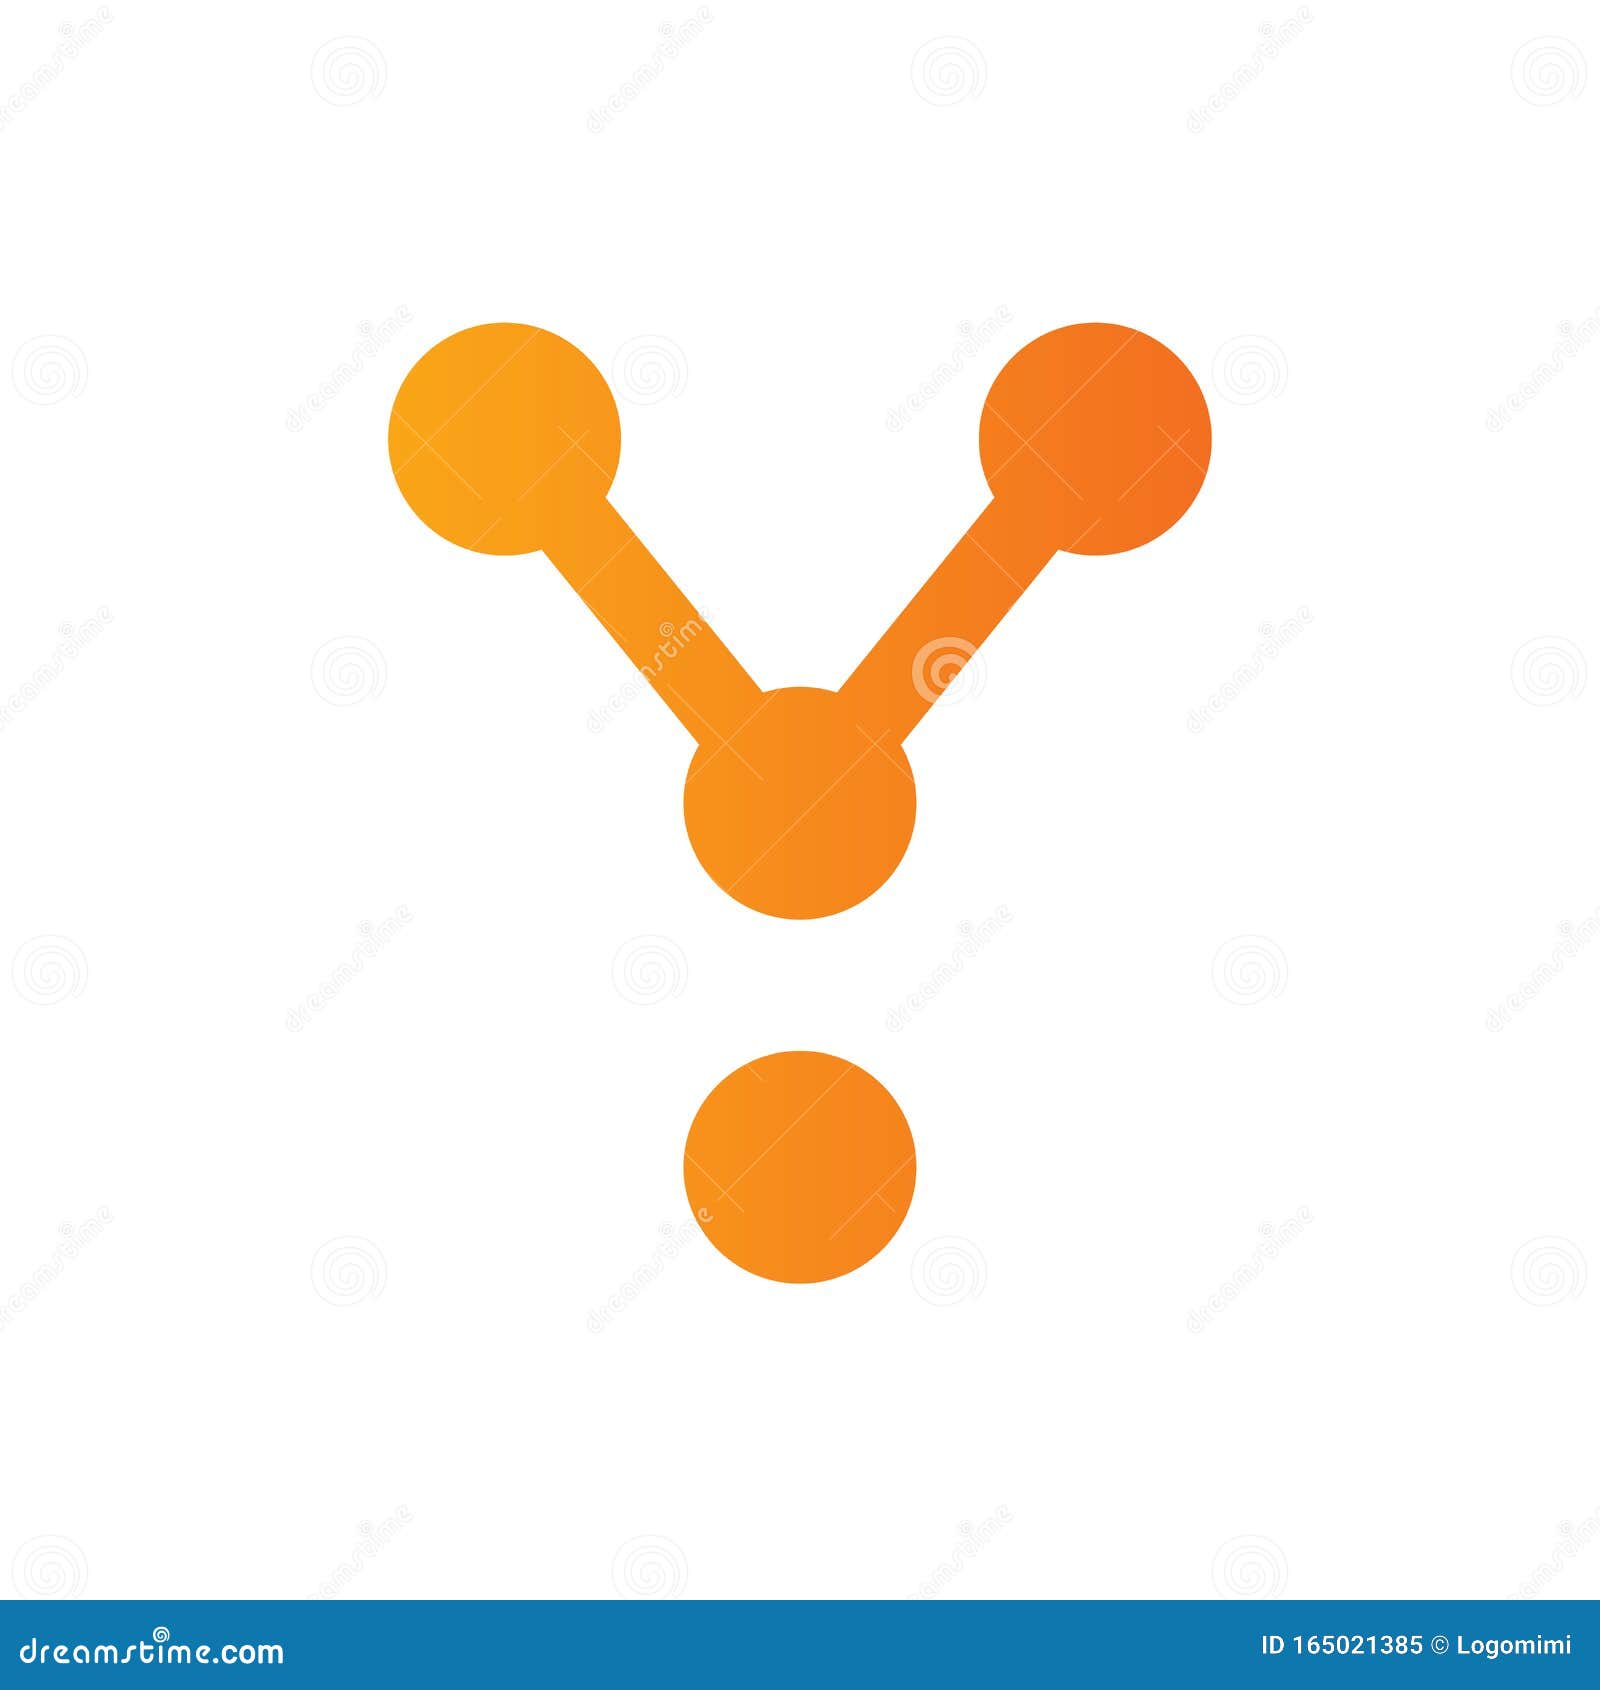 letter y tech logo, abstract dots connection concept, moden   